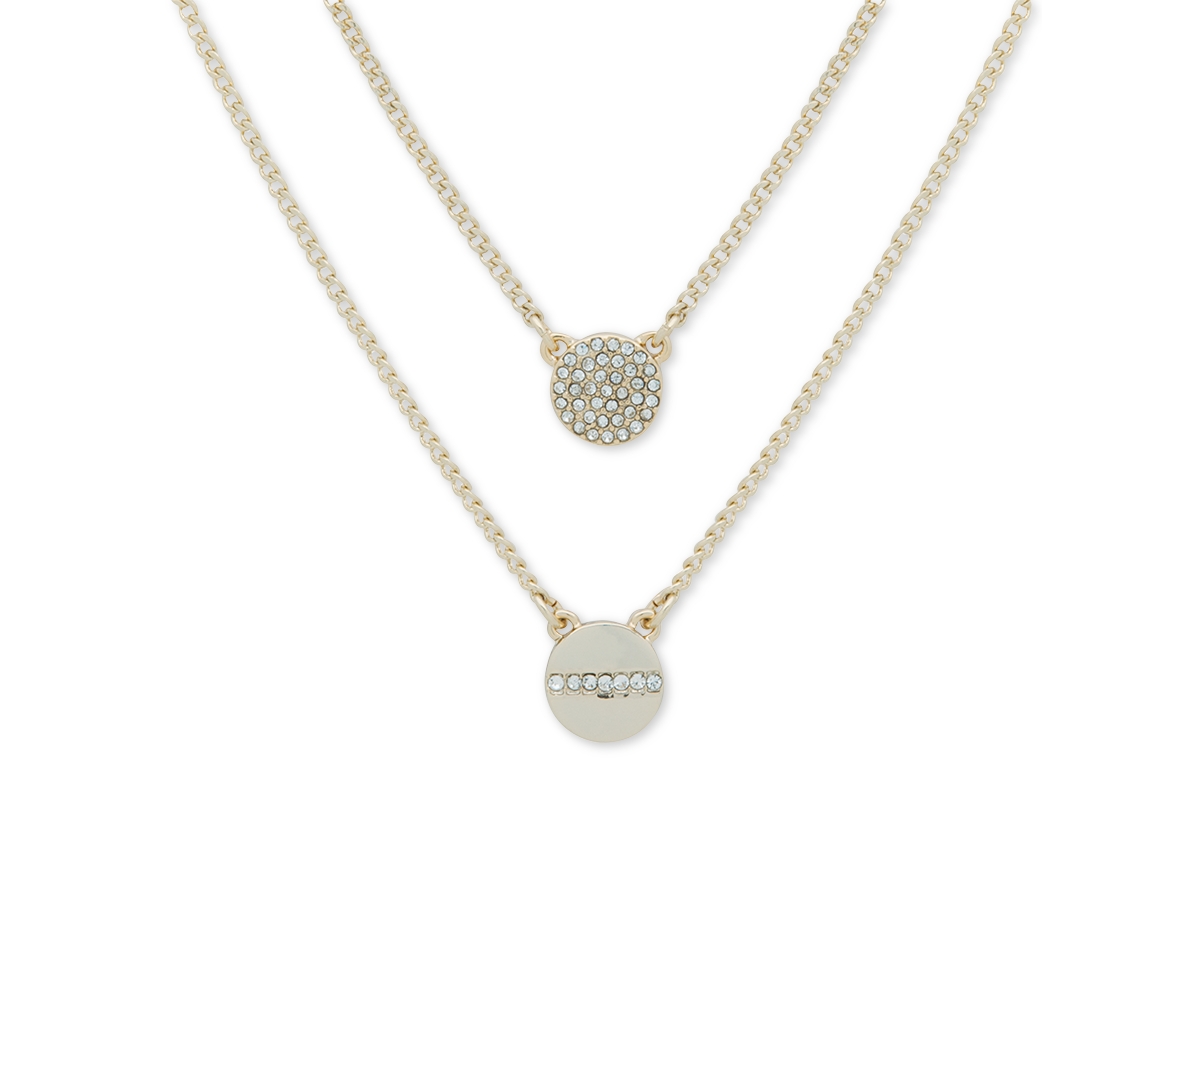 Gold-Tone Crystal Pendant Two-Row Necklace, 16" + 3' extender - Crystal